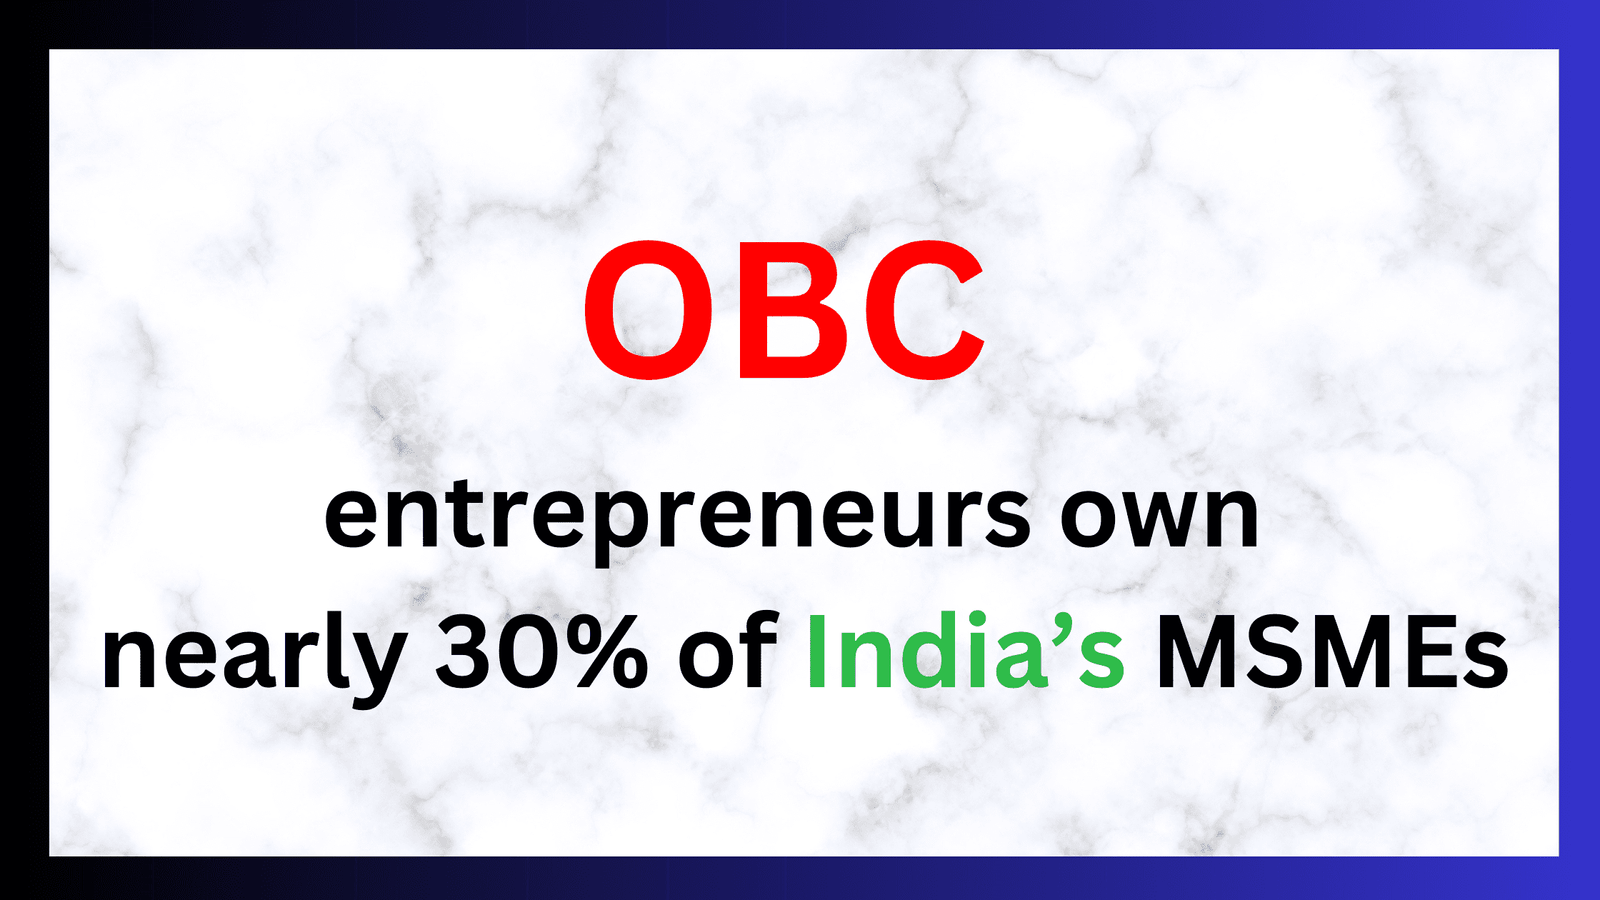 OBC entrepreneurs own nearly 30% of India’s MSMEs